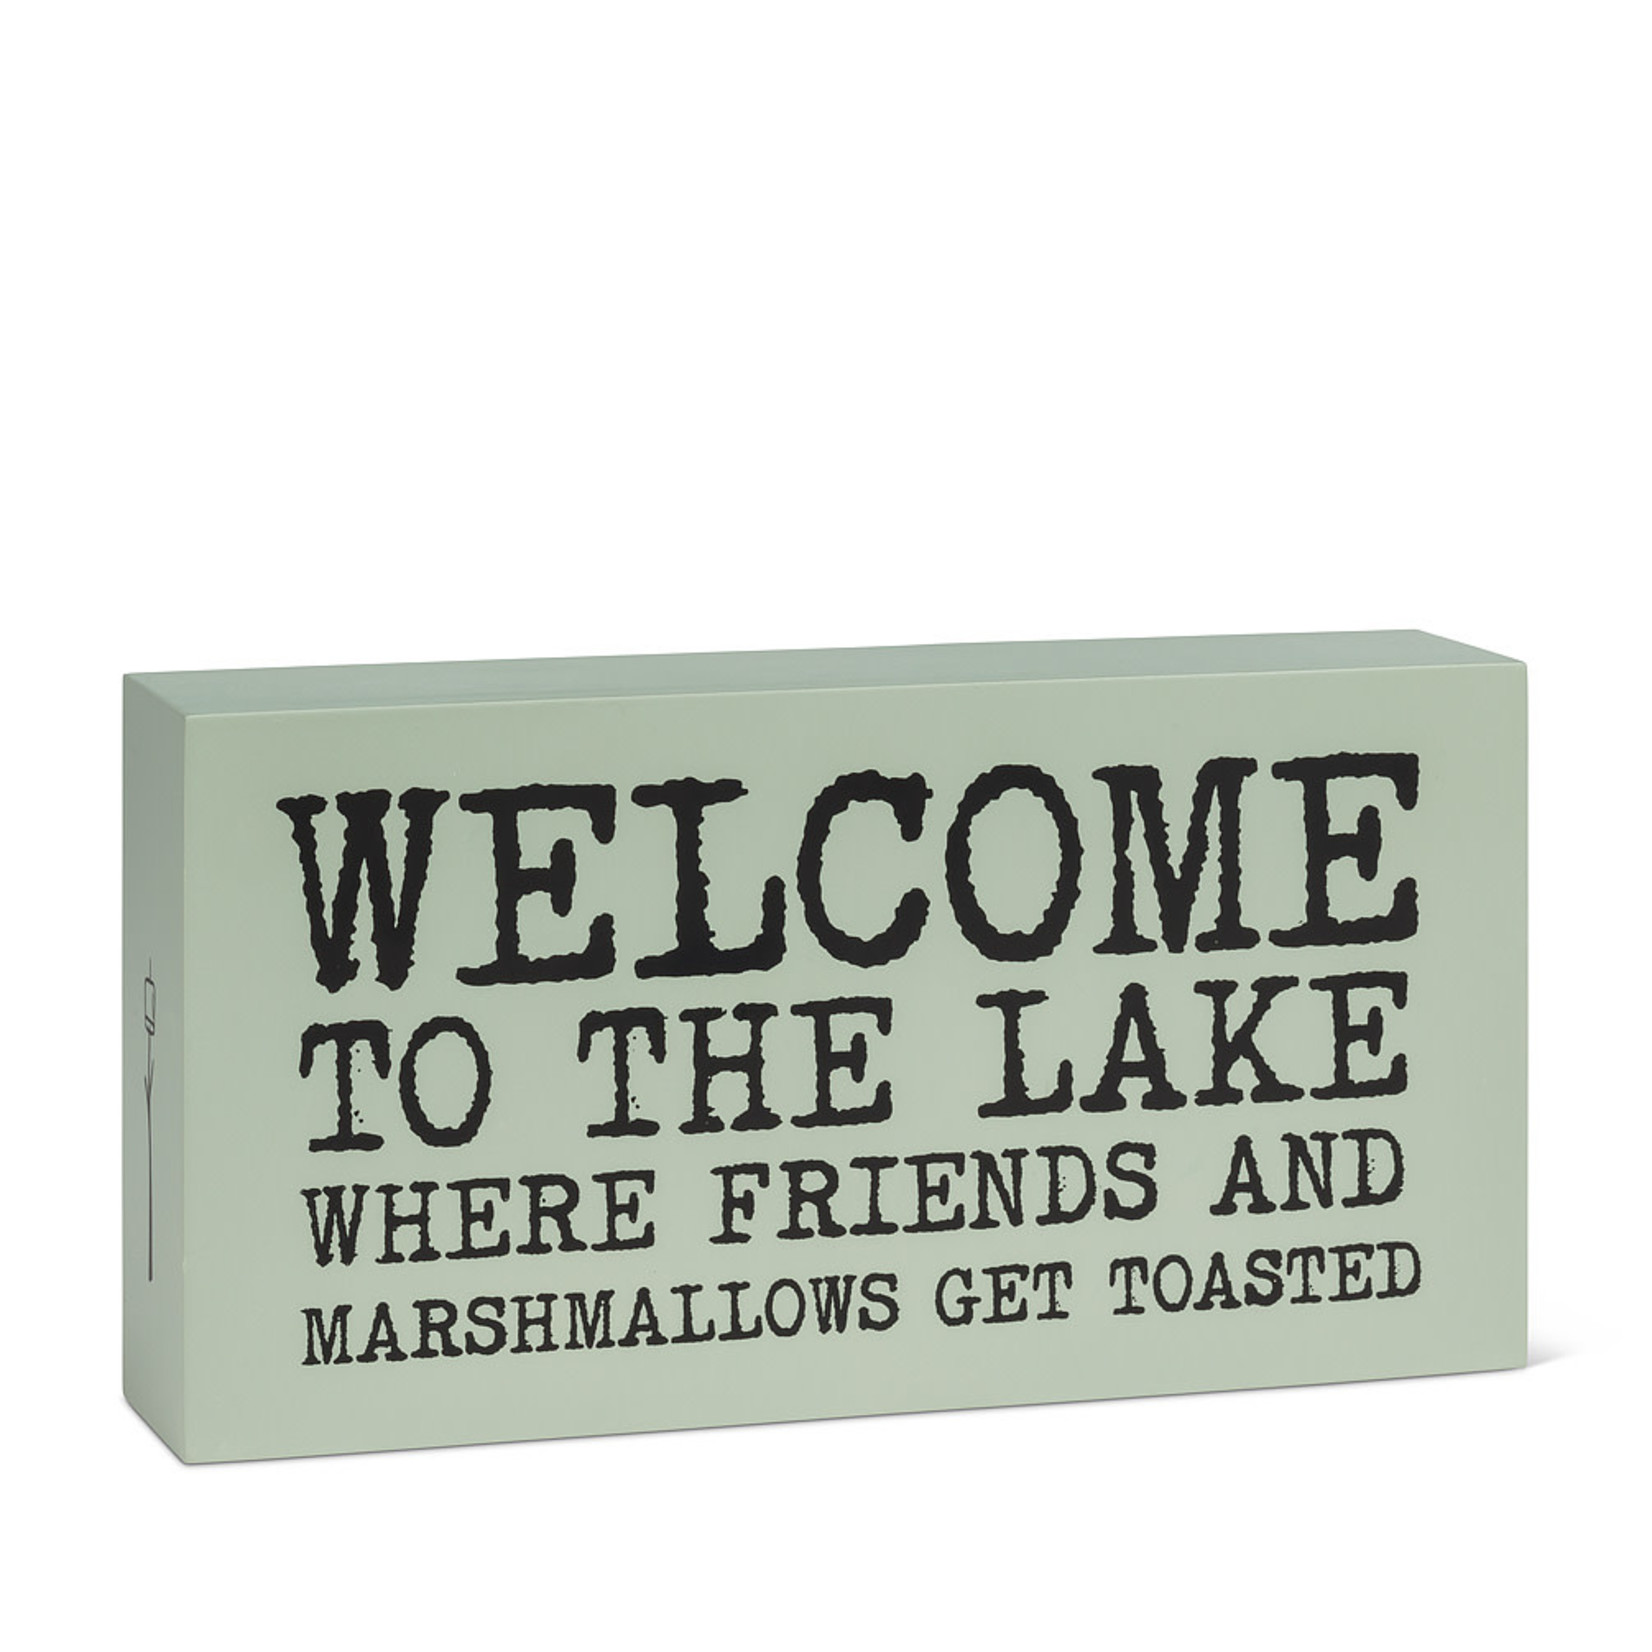 Welcome to the lake -block sign